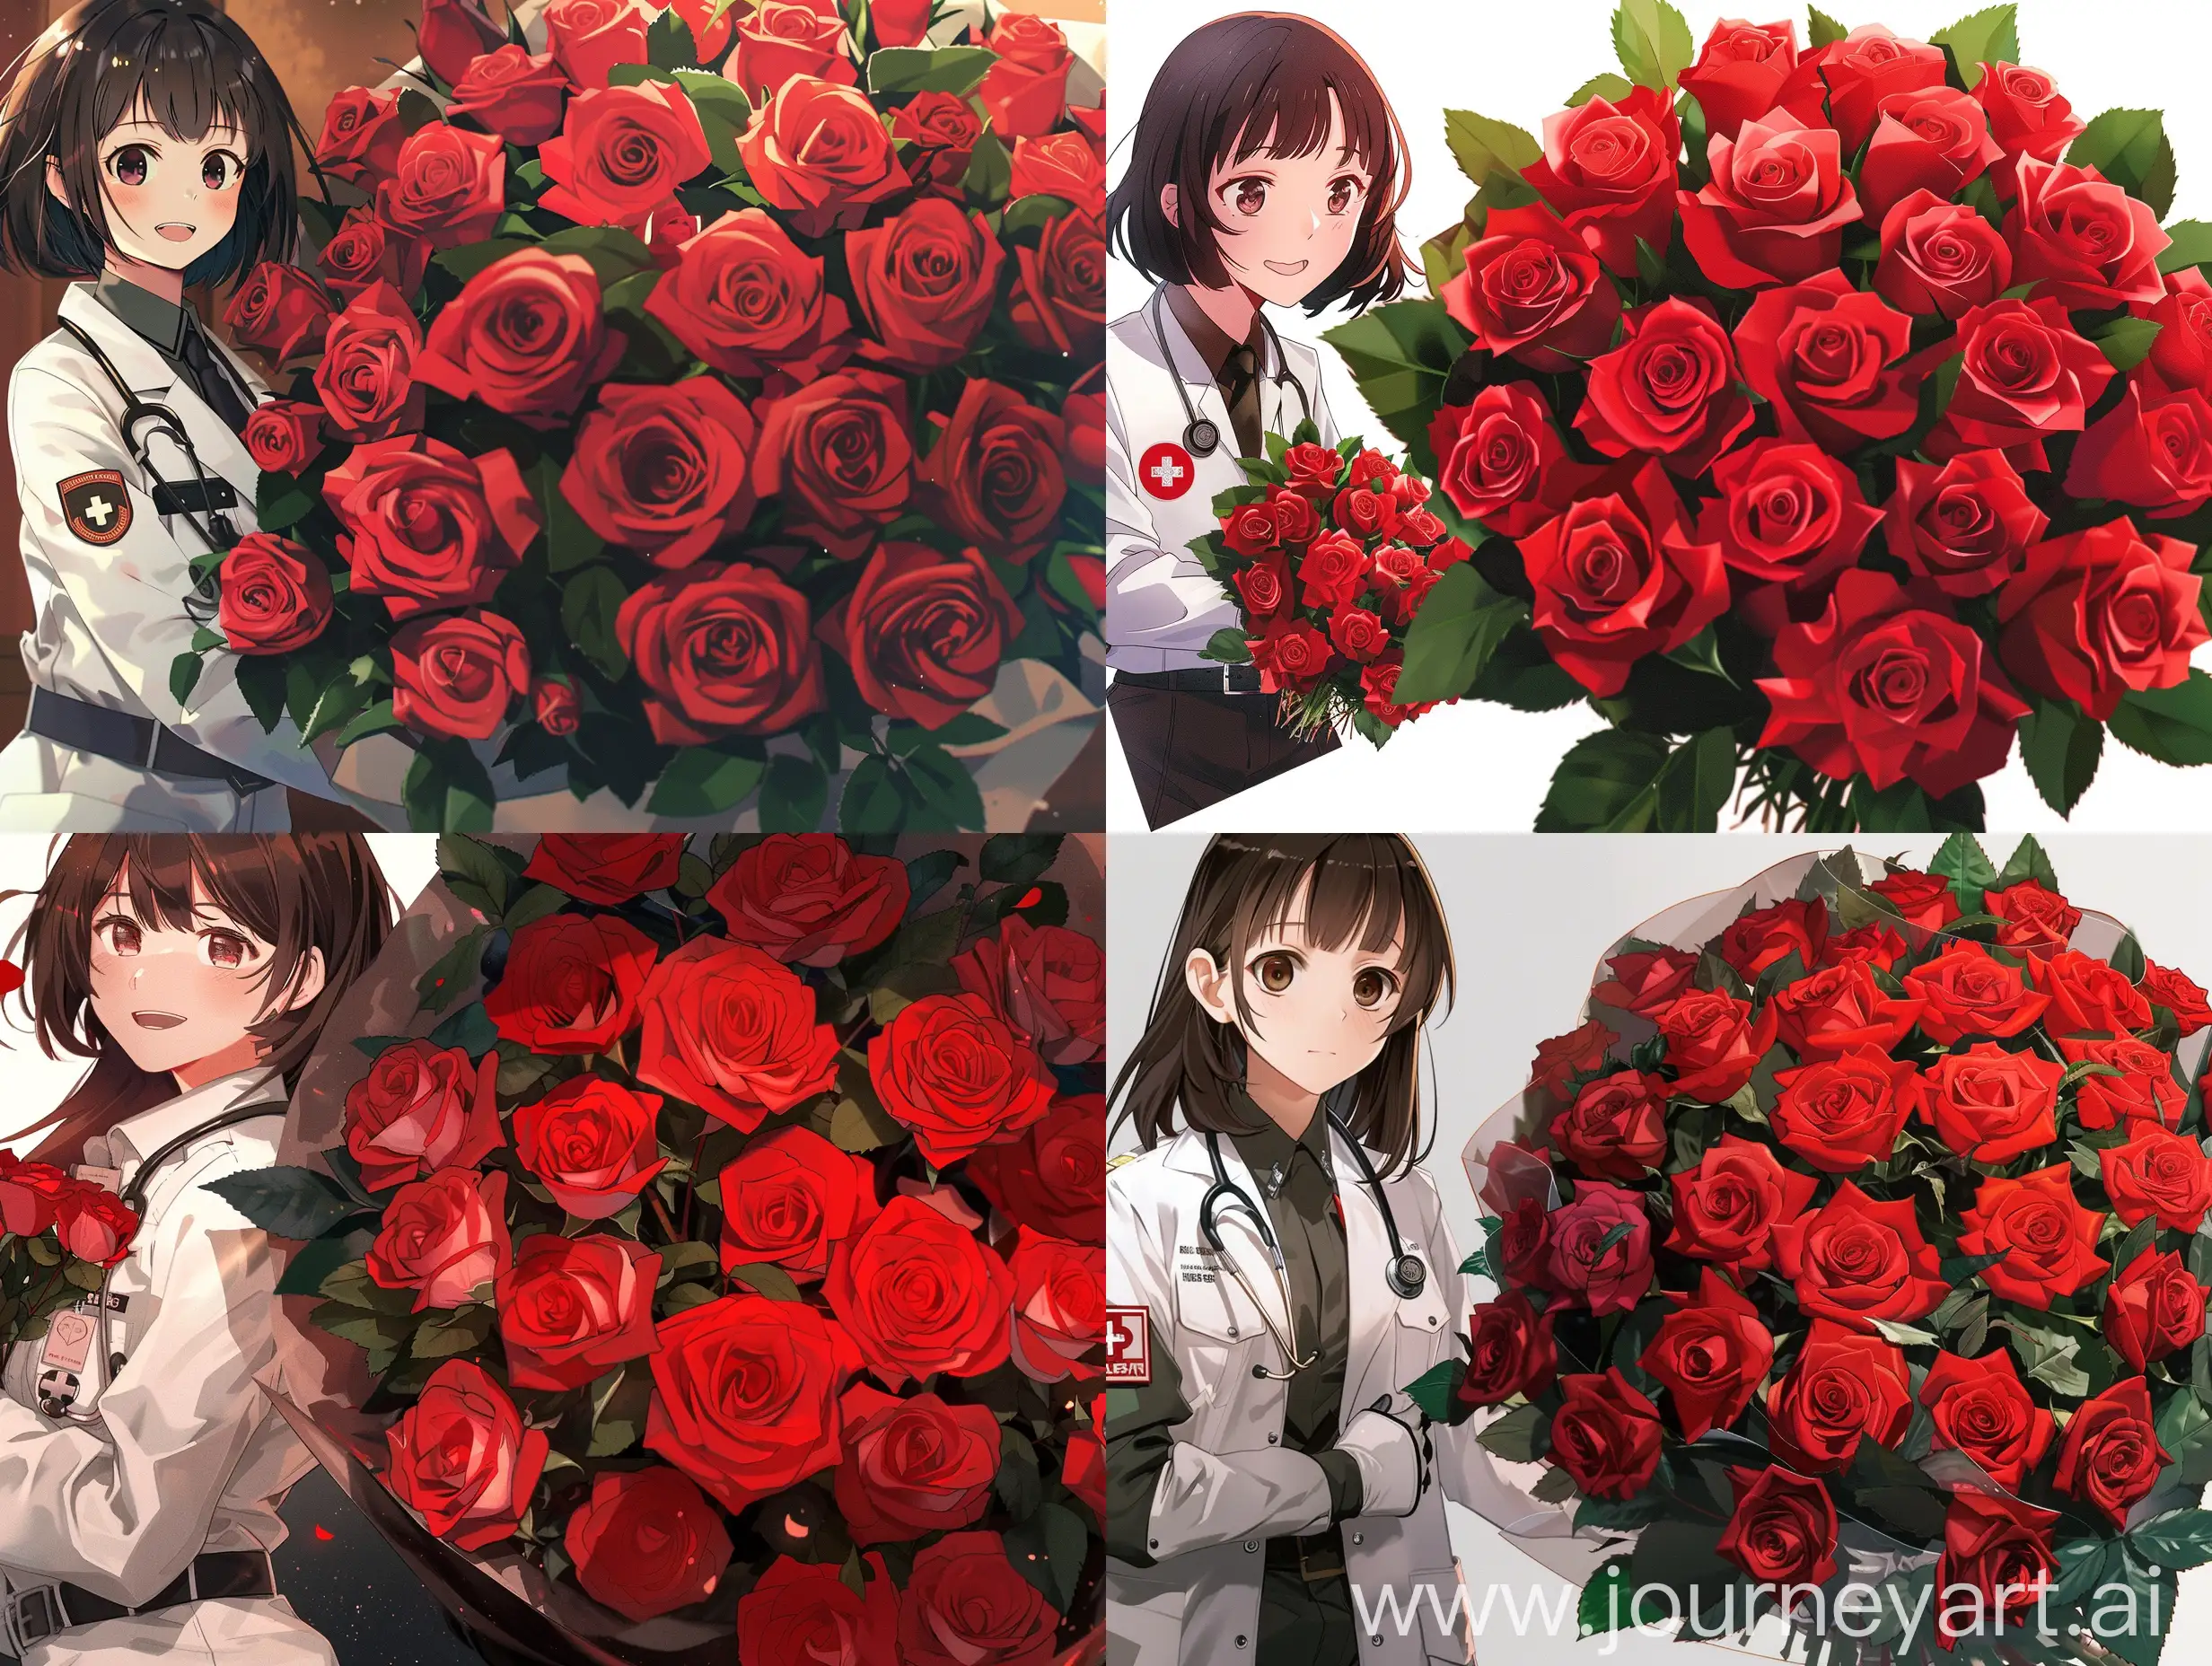 Medic-Girl-Holding-Bouquet-of-Red-Roses-in-White-Coat